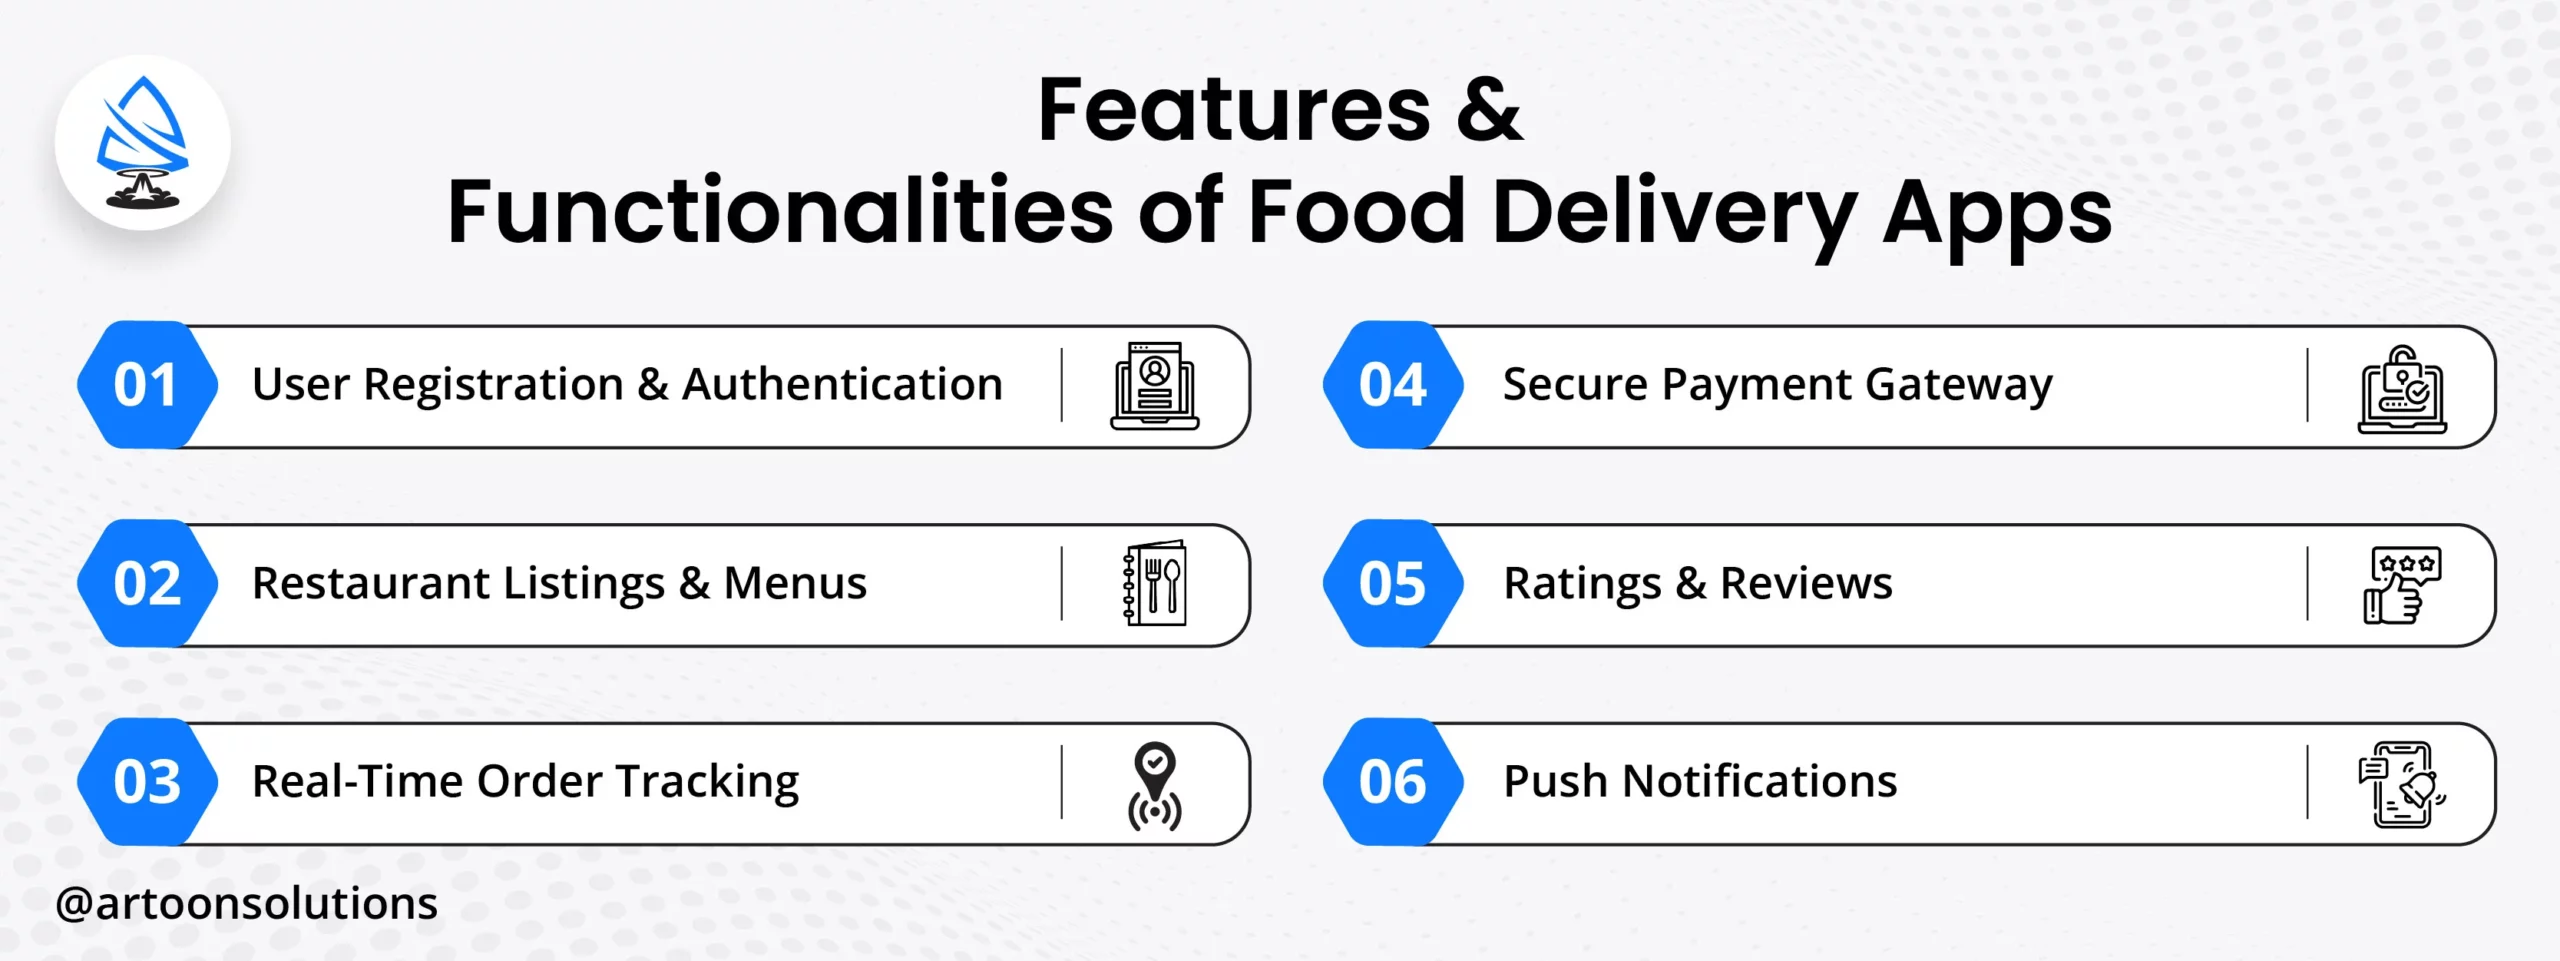 Features and Functionalities of Food Delivery Apps